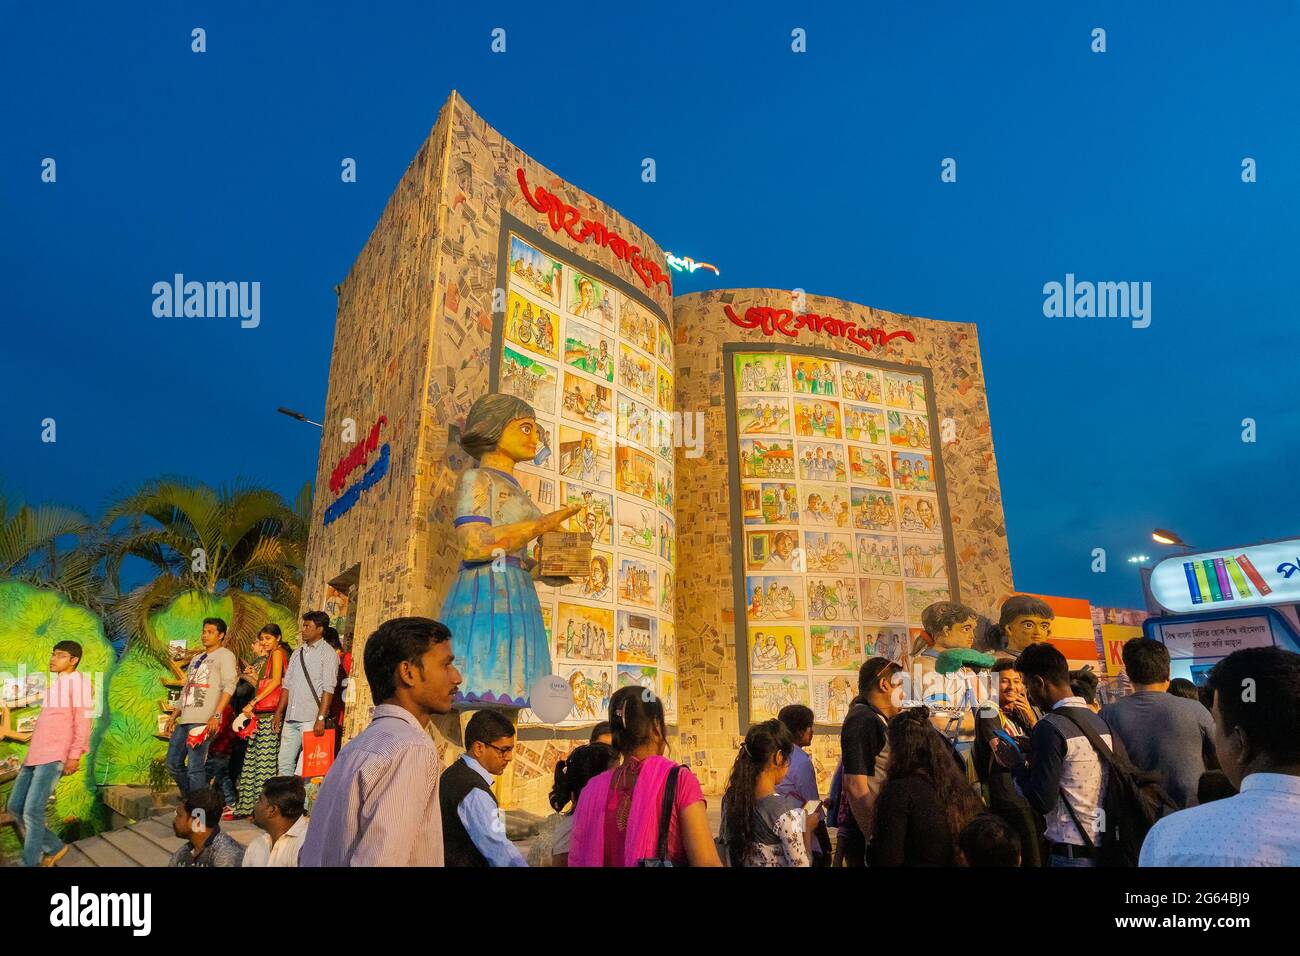 KOLKATA, INDIA - FEBRUARY 9TH , 2018 : Customers at Kolkata book fair. It is world's largest, most attended and famous non-trade book fair. Stock Photo